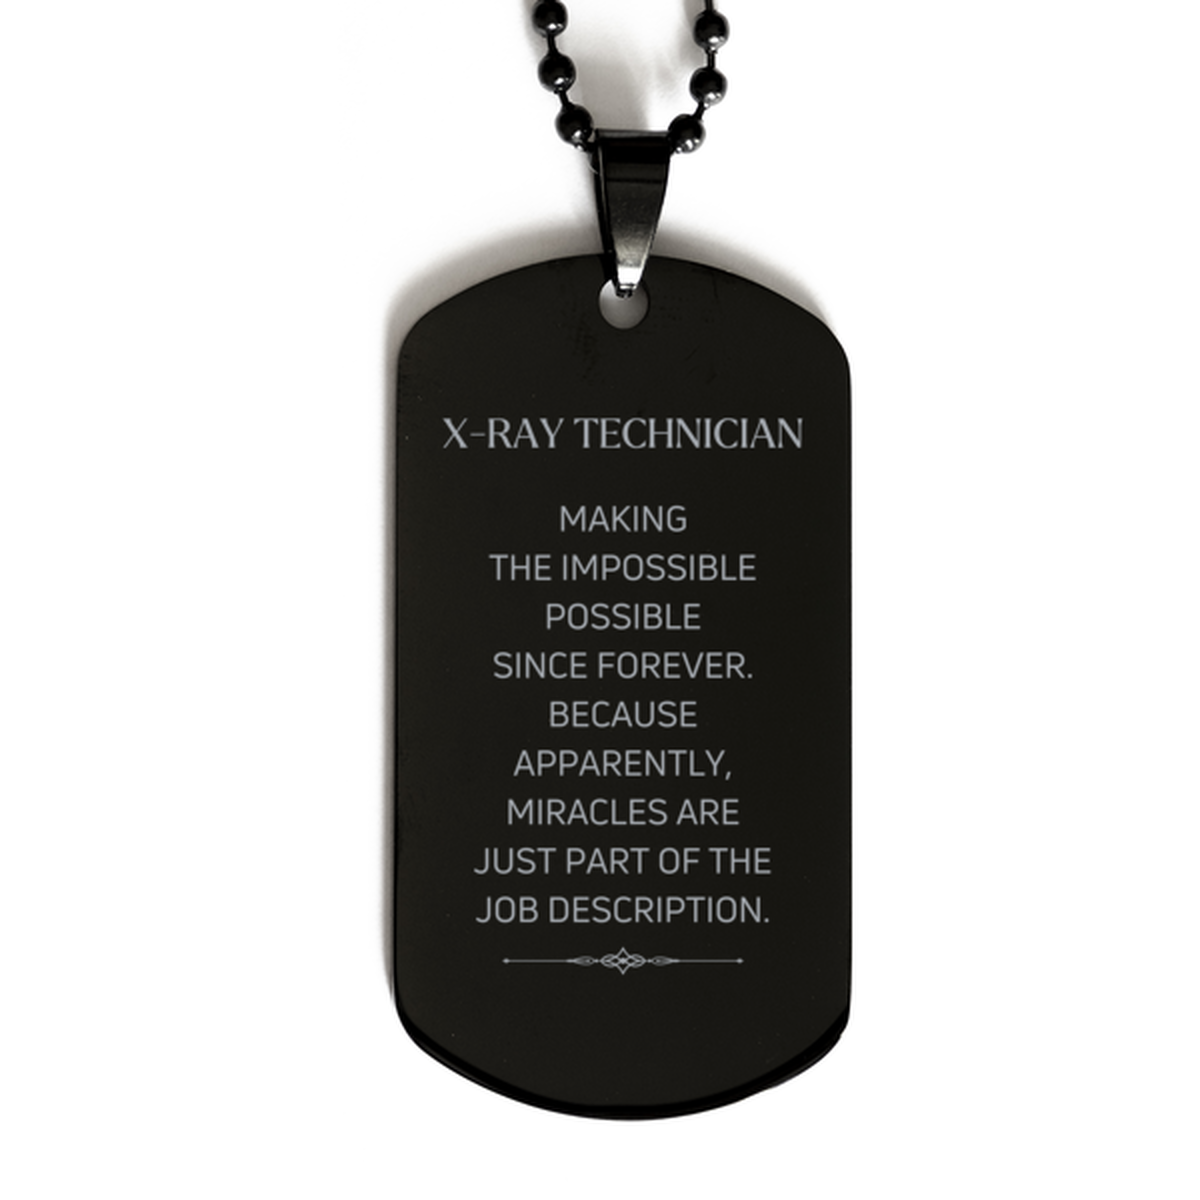 Funny X-Ray Technician Gifts, Miracles are just part of the job description, Inspirational Birthday Black Dog Tag For X-Ray Technician, Men, Women, Coworkers, Friends, Boss